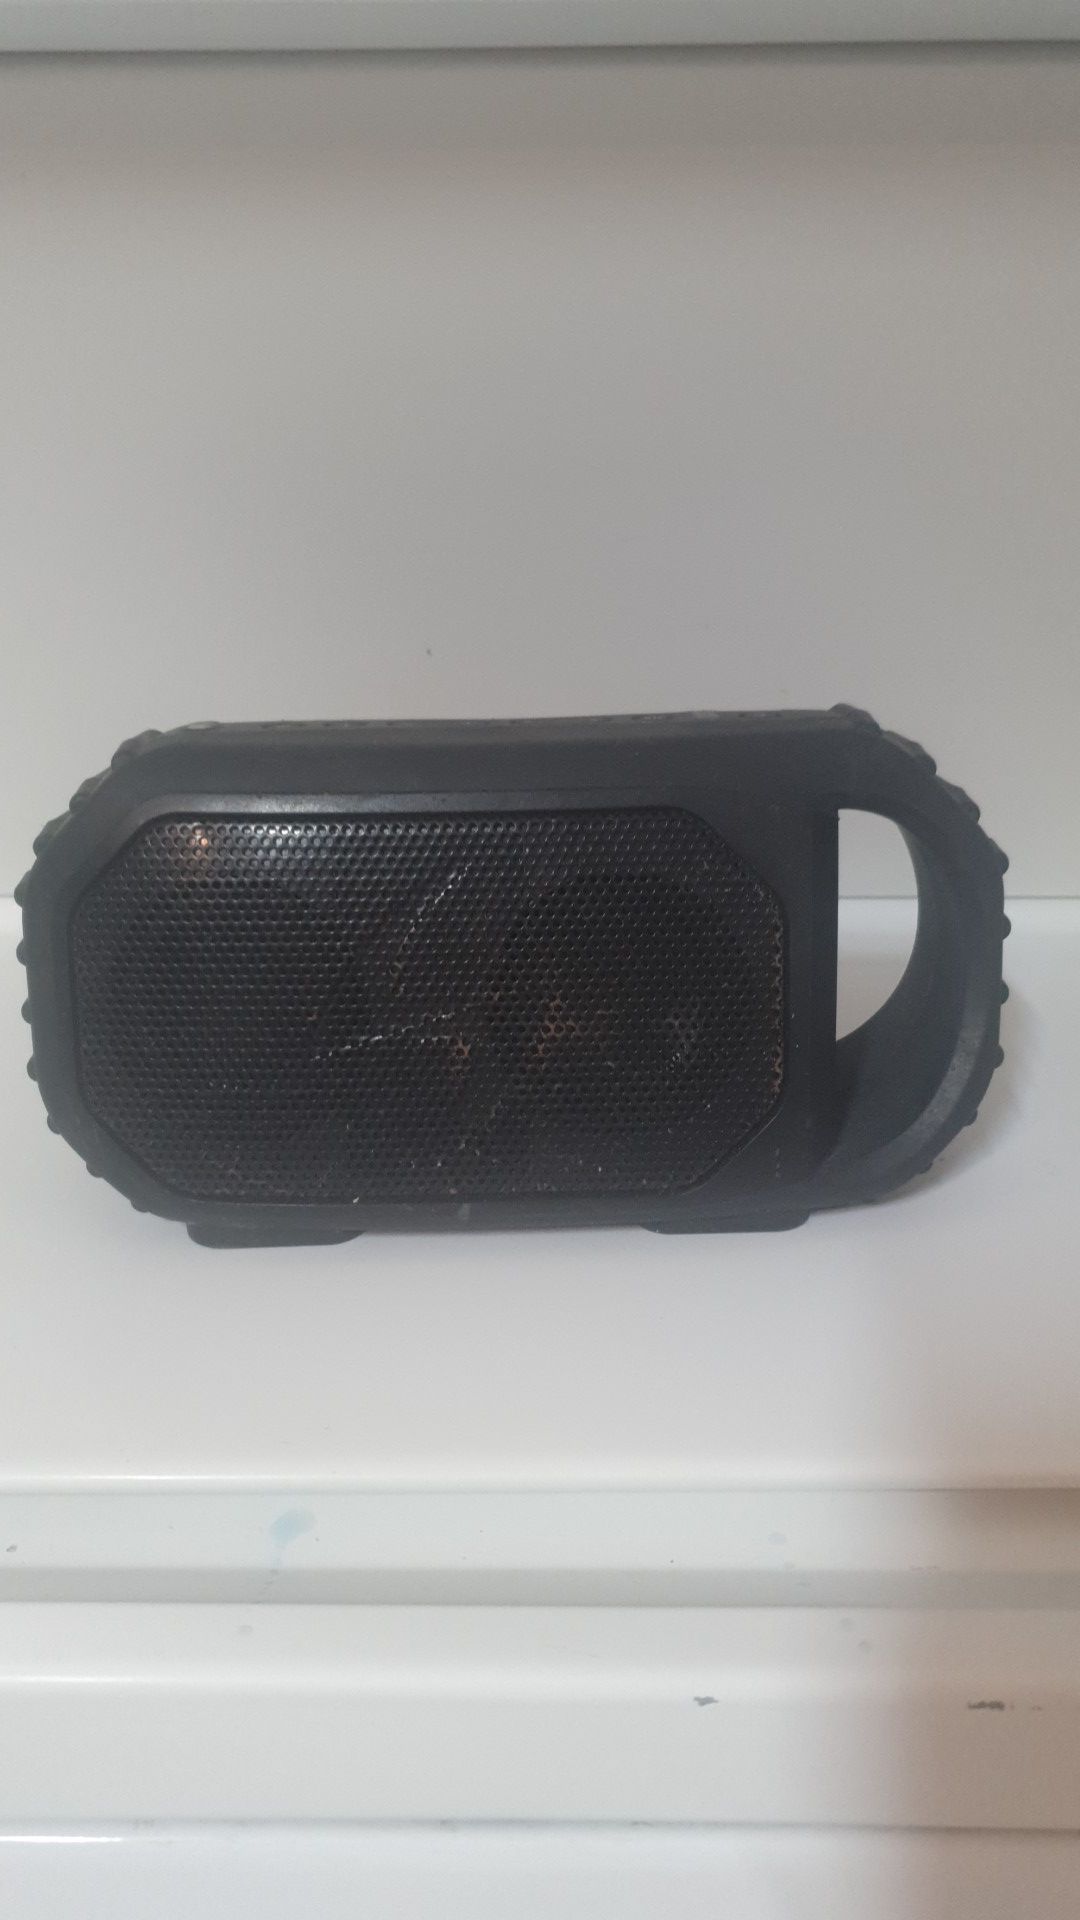 Portable speaker 🔊 works and bluetooth